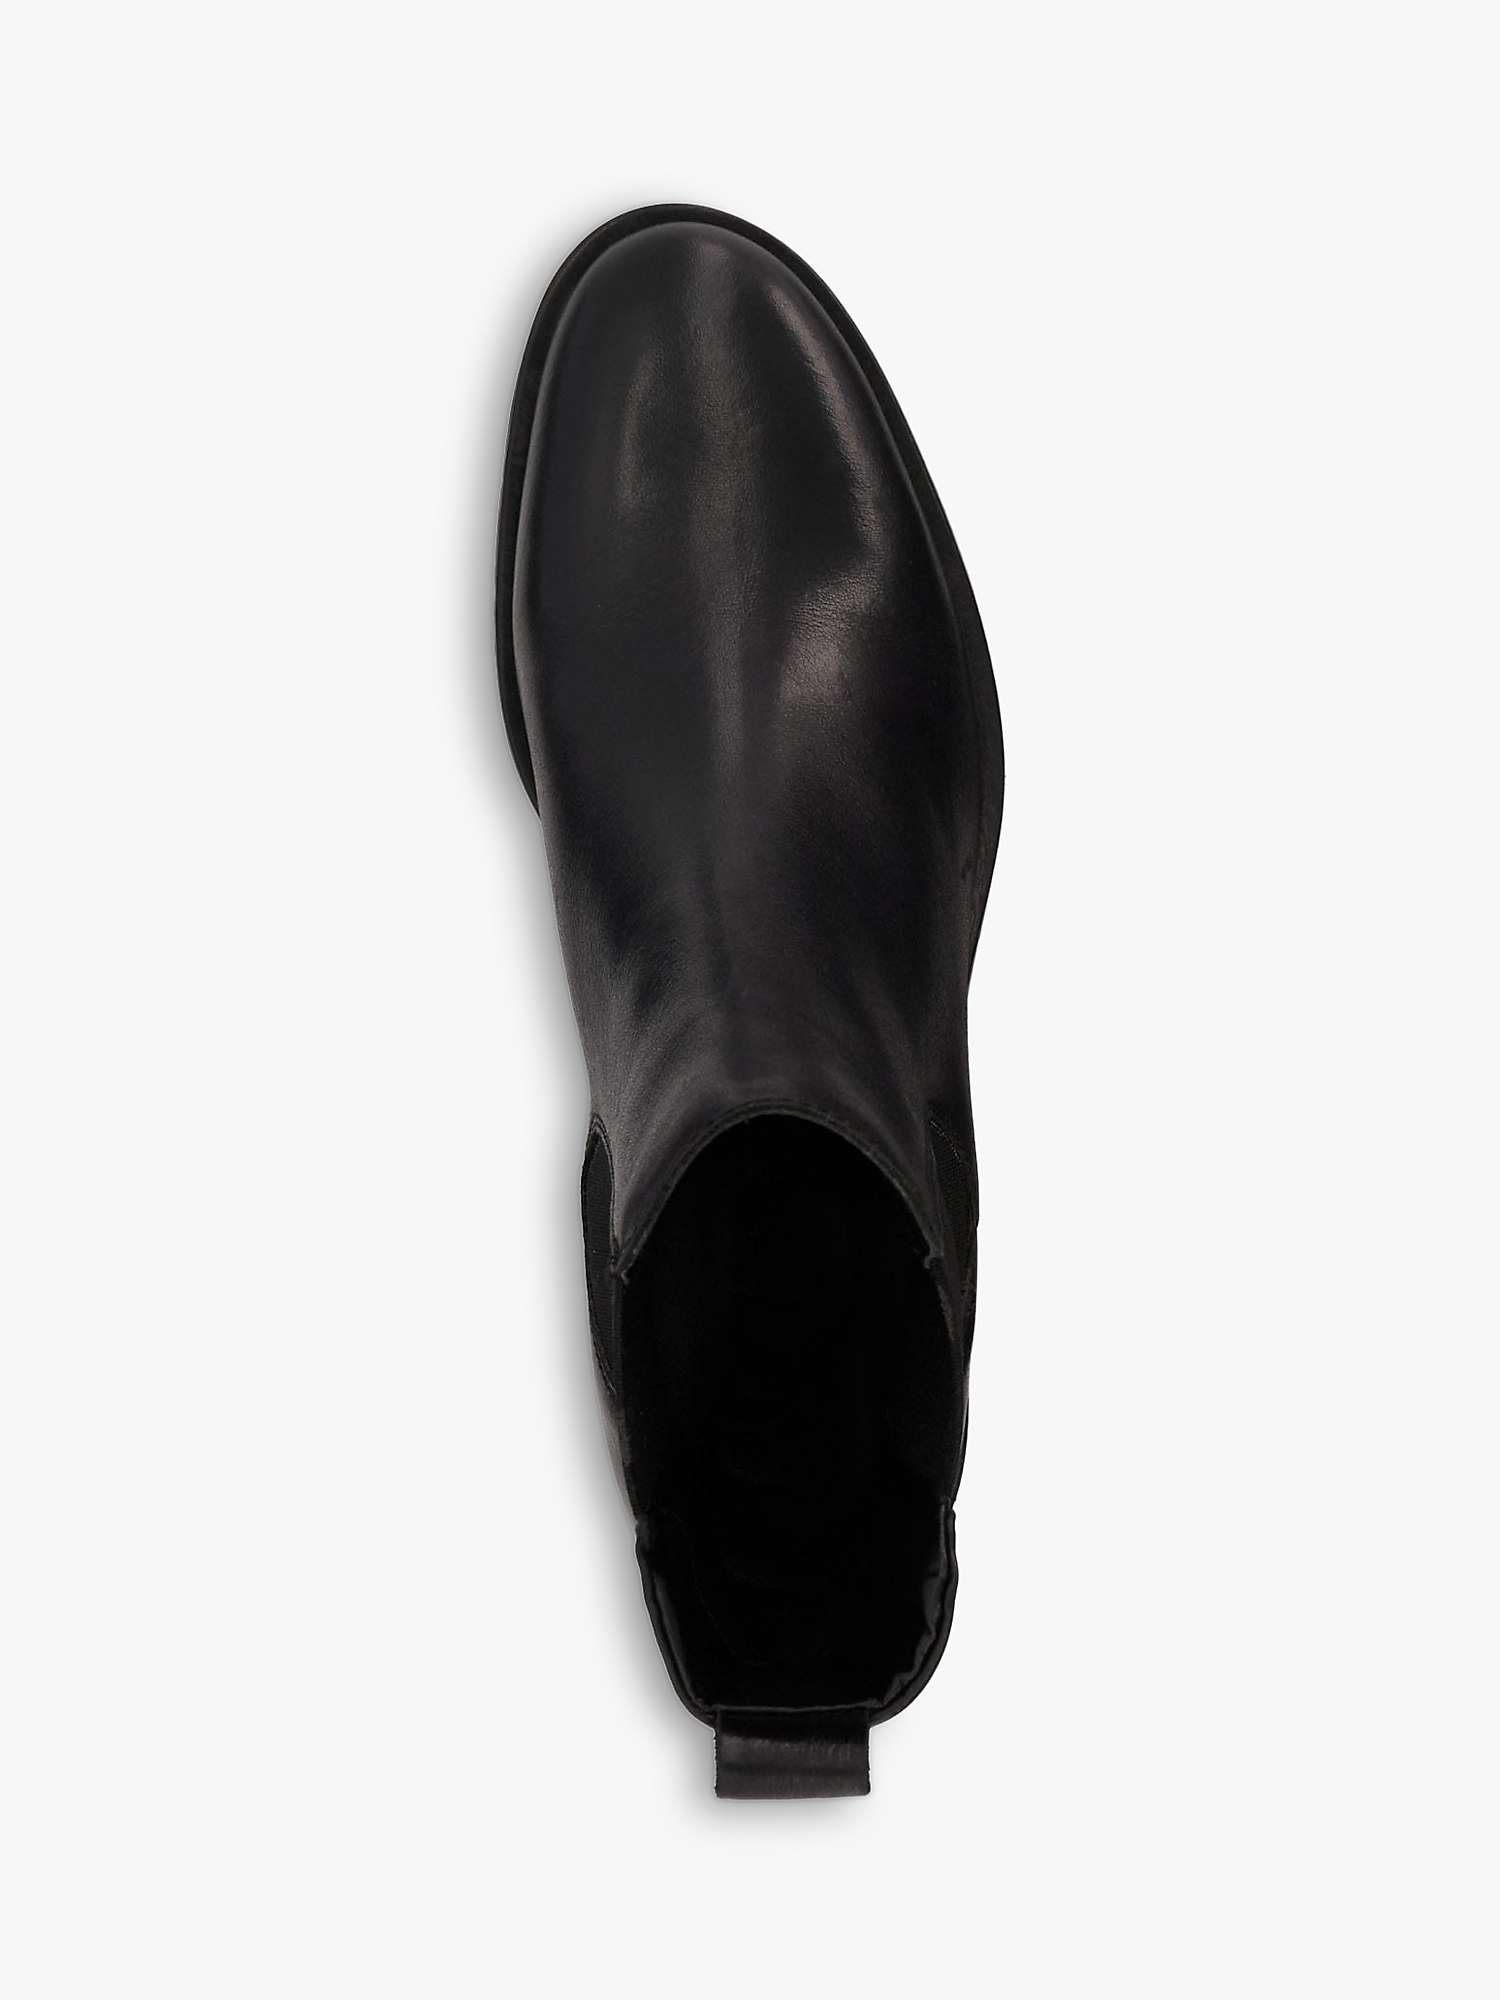 Dune Panoramic Leather Chelsea Boots, Black at John Lewis & Partners